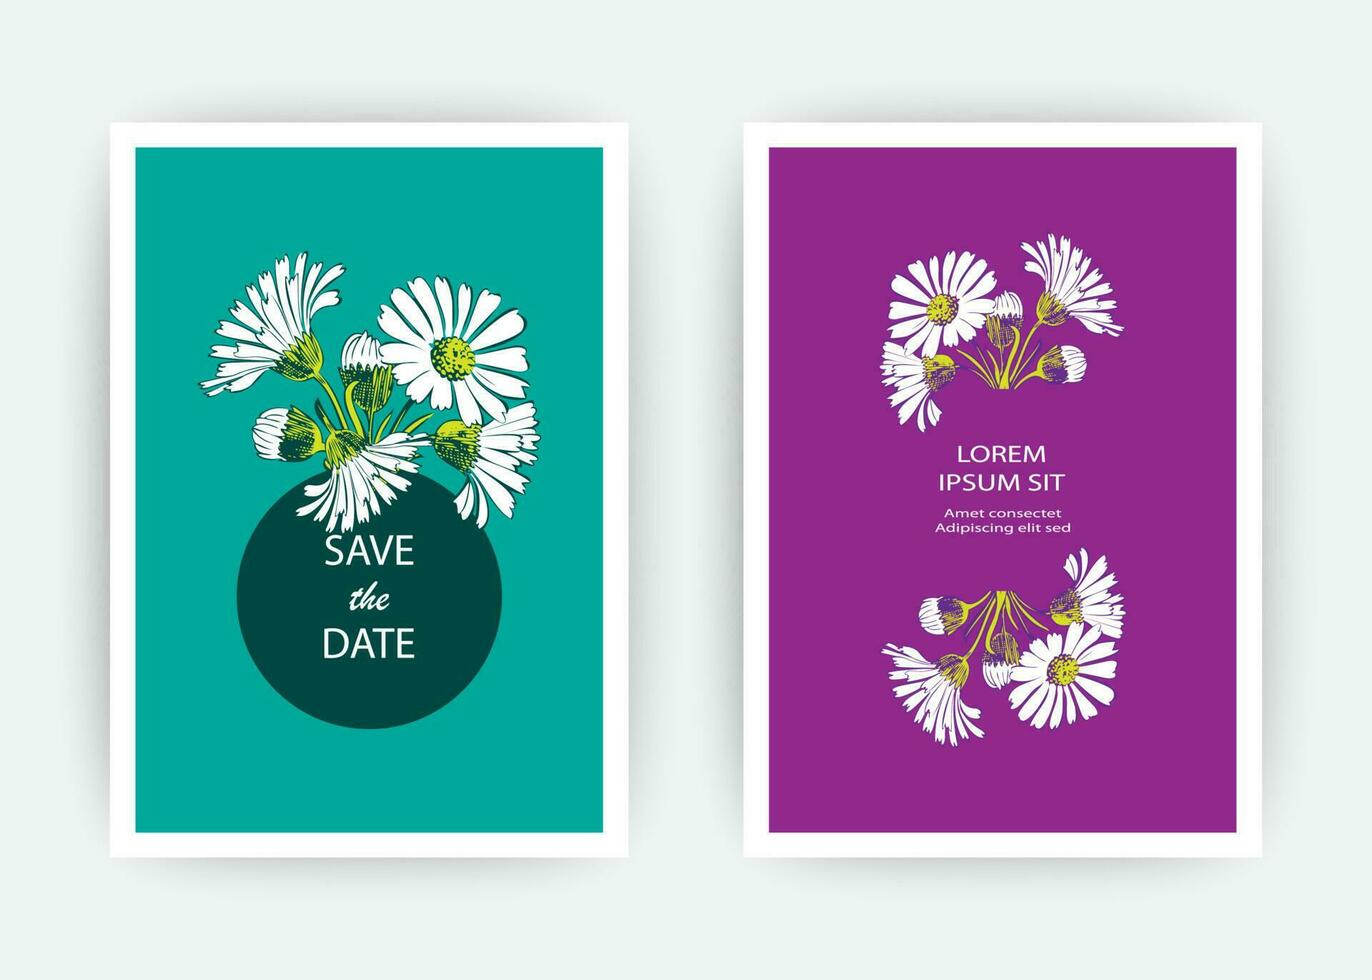 Hand drawn close-up Chrysanthemum flower artistic vector illustration. Botanical wedding ornament. Petals painted in white. Floral trendy pattern Greeting card invitation on blue purple backgrounds